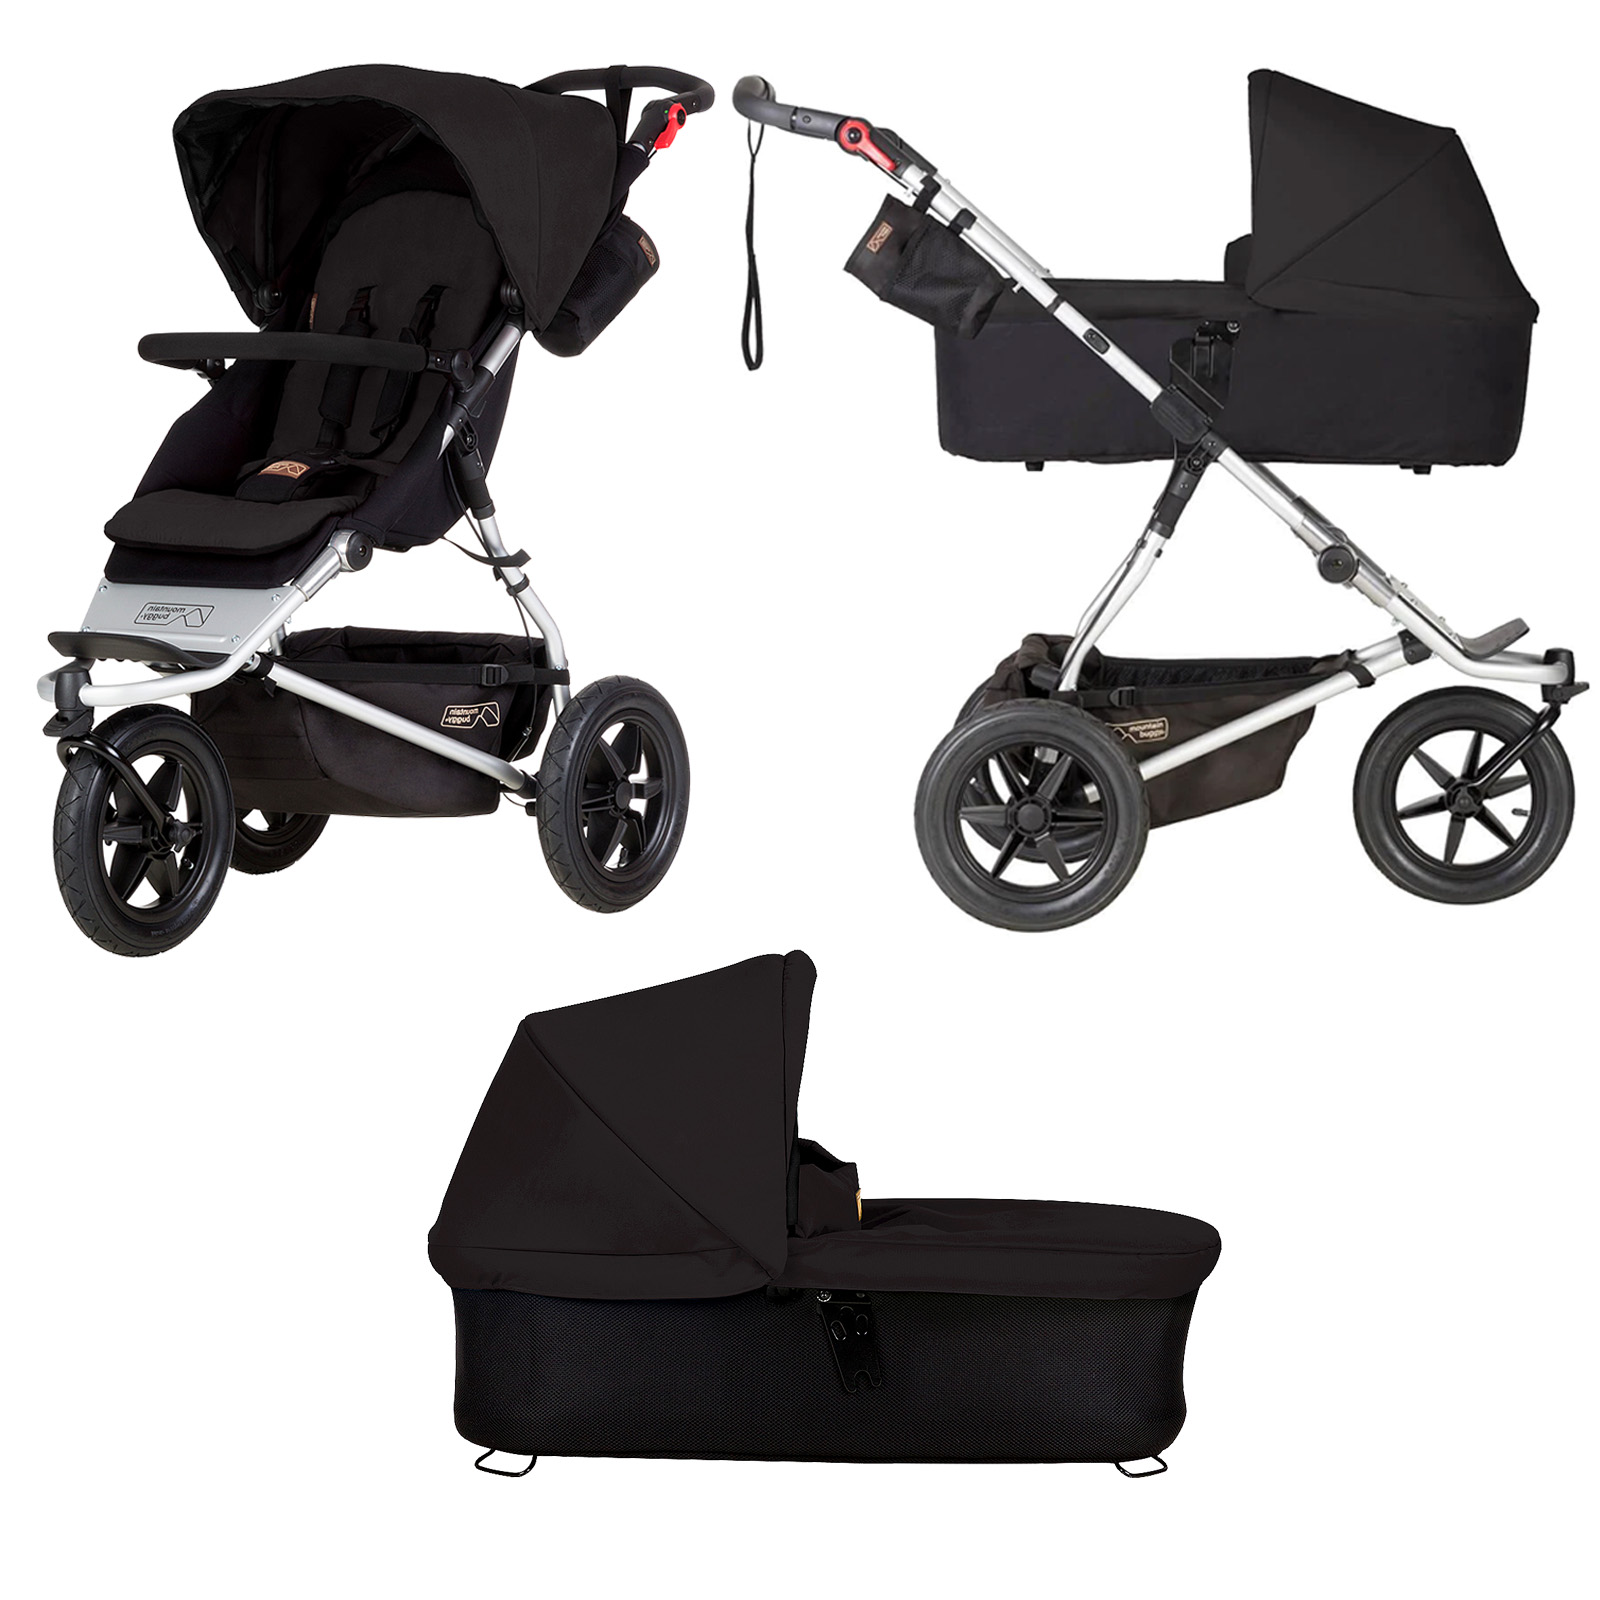 mountain buggy urban jungle travel system